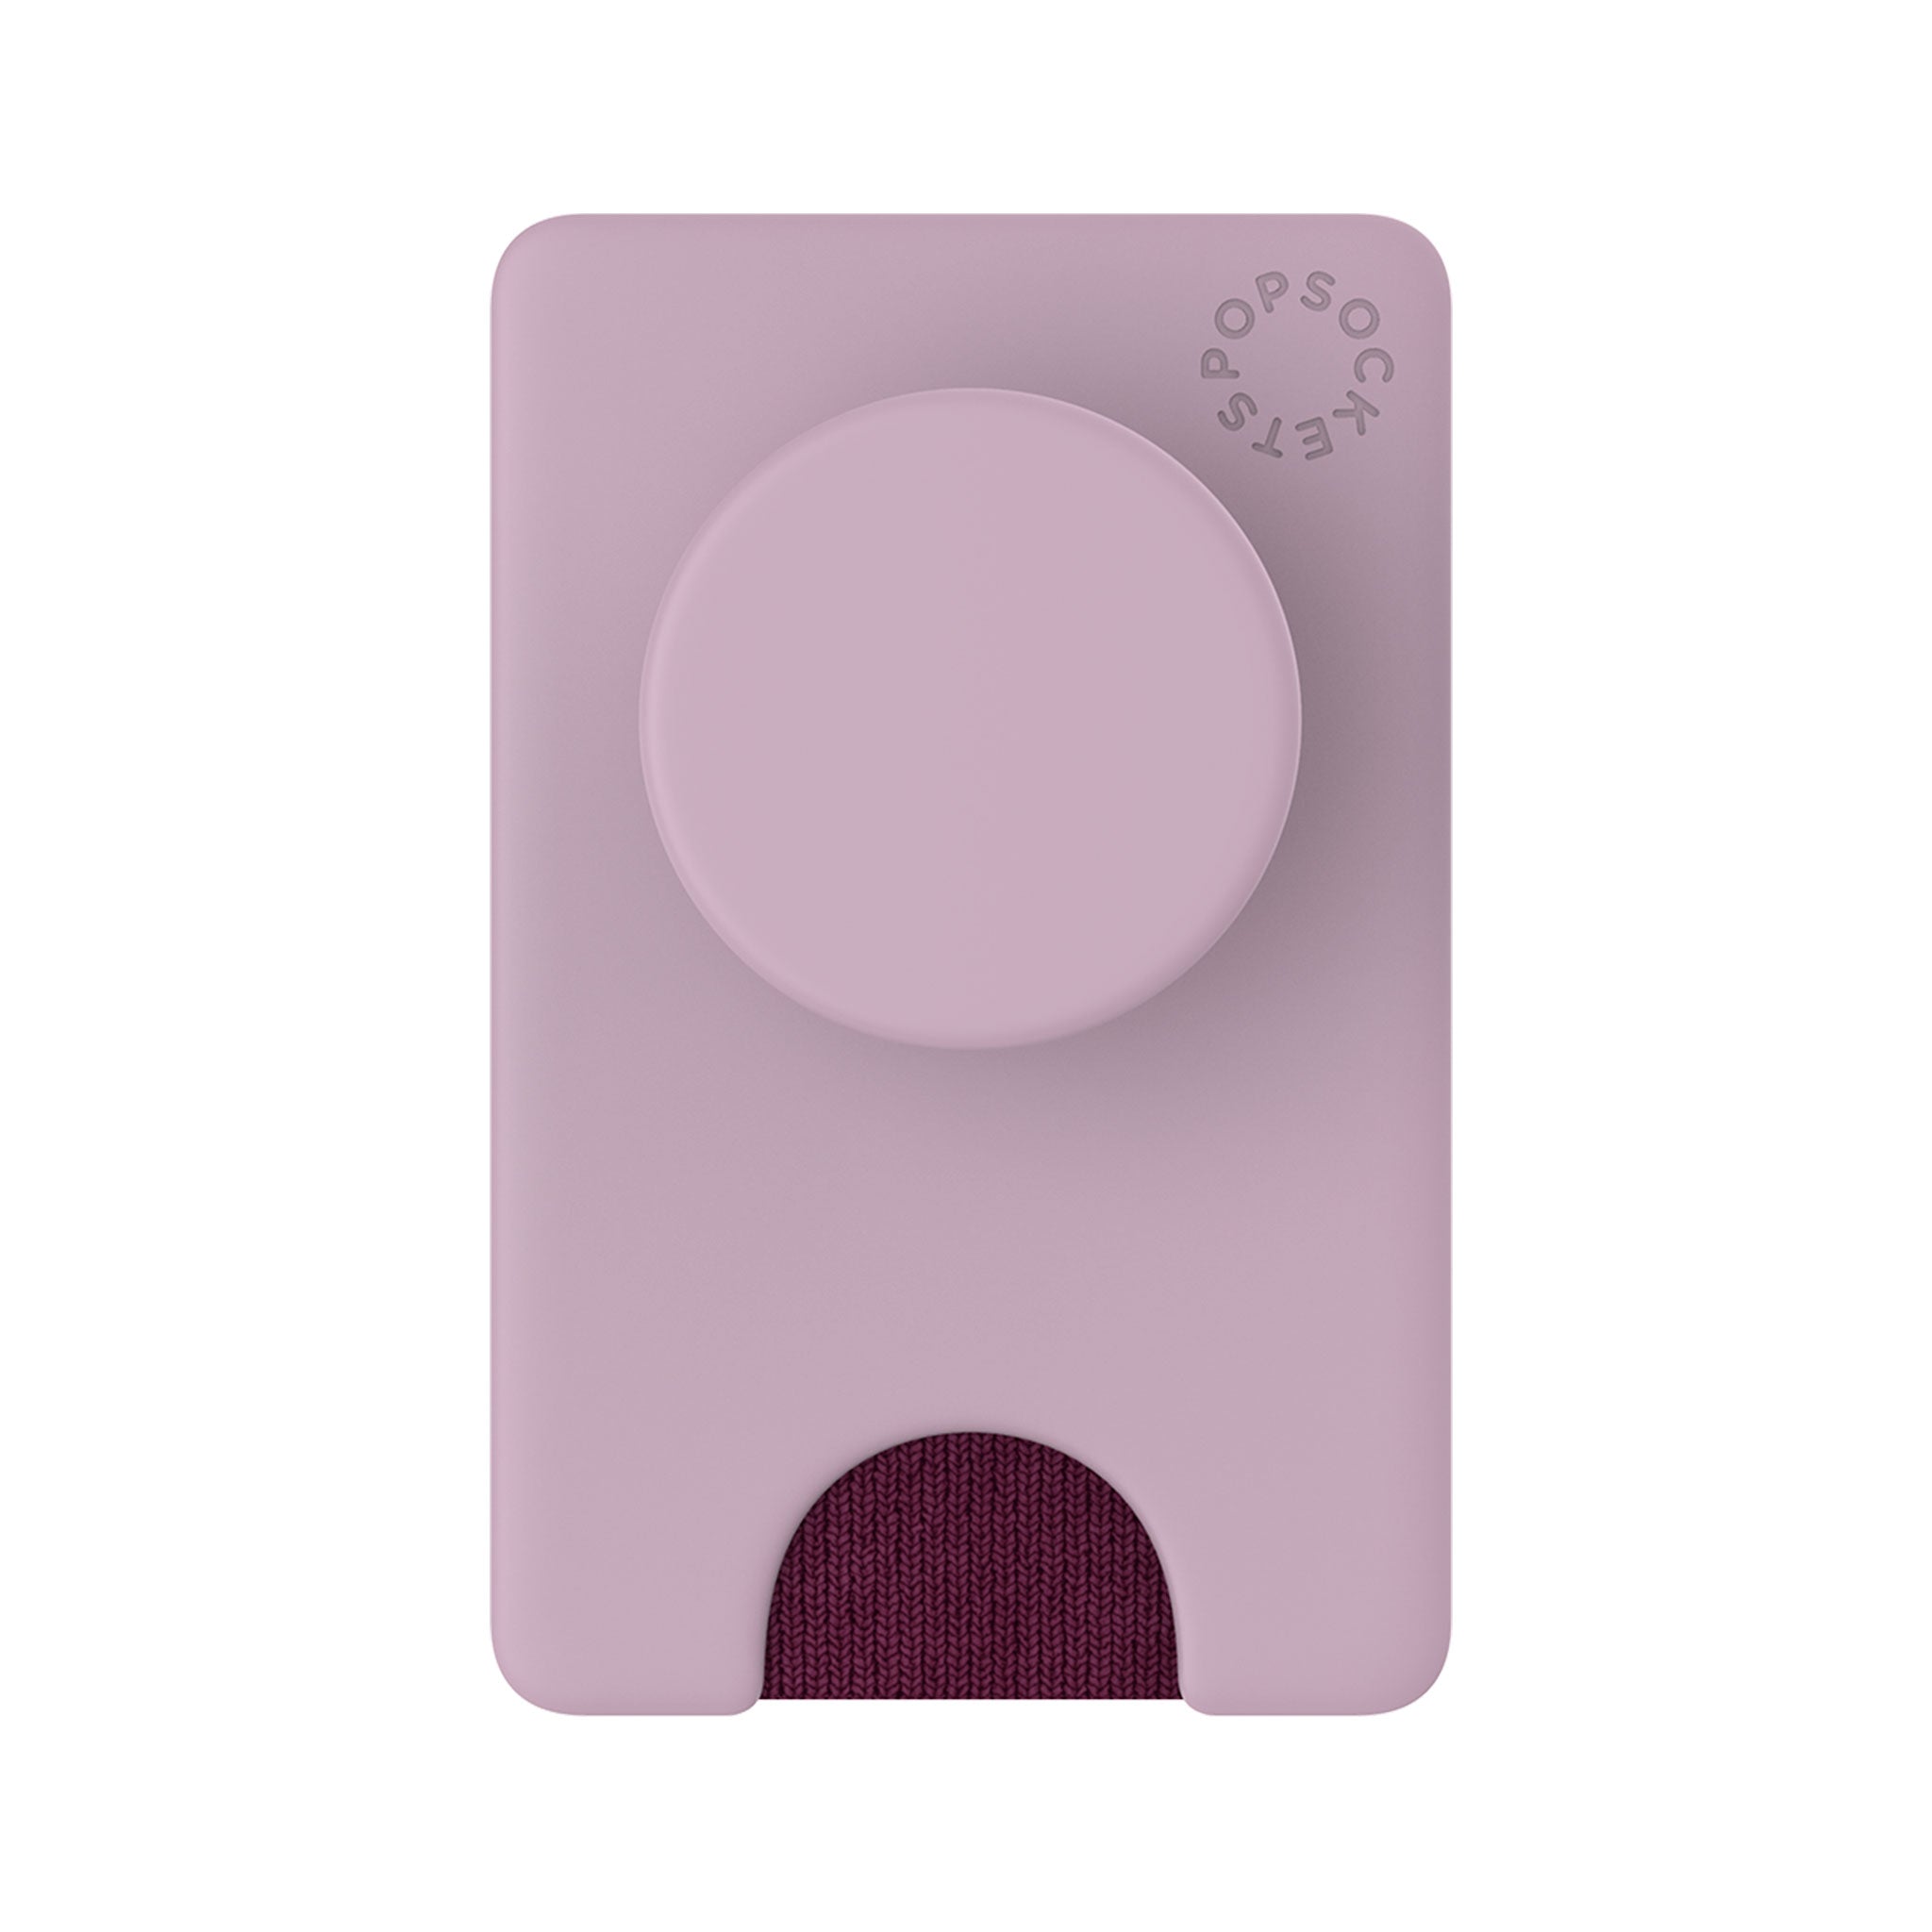 Popsockets - Popwallet Plus With Popgrip - Blush Pink